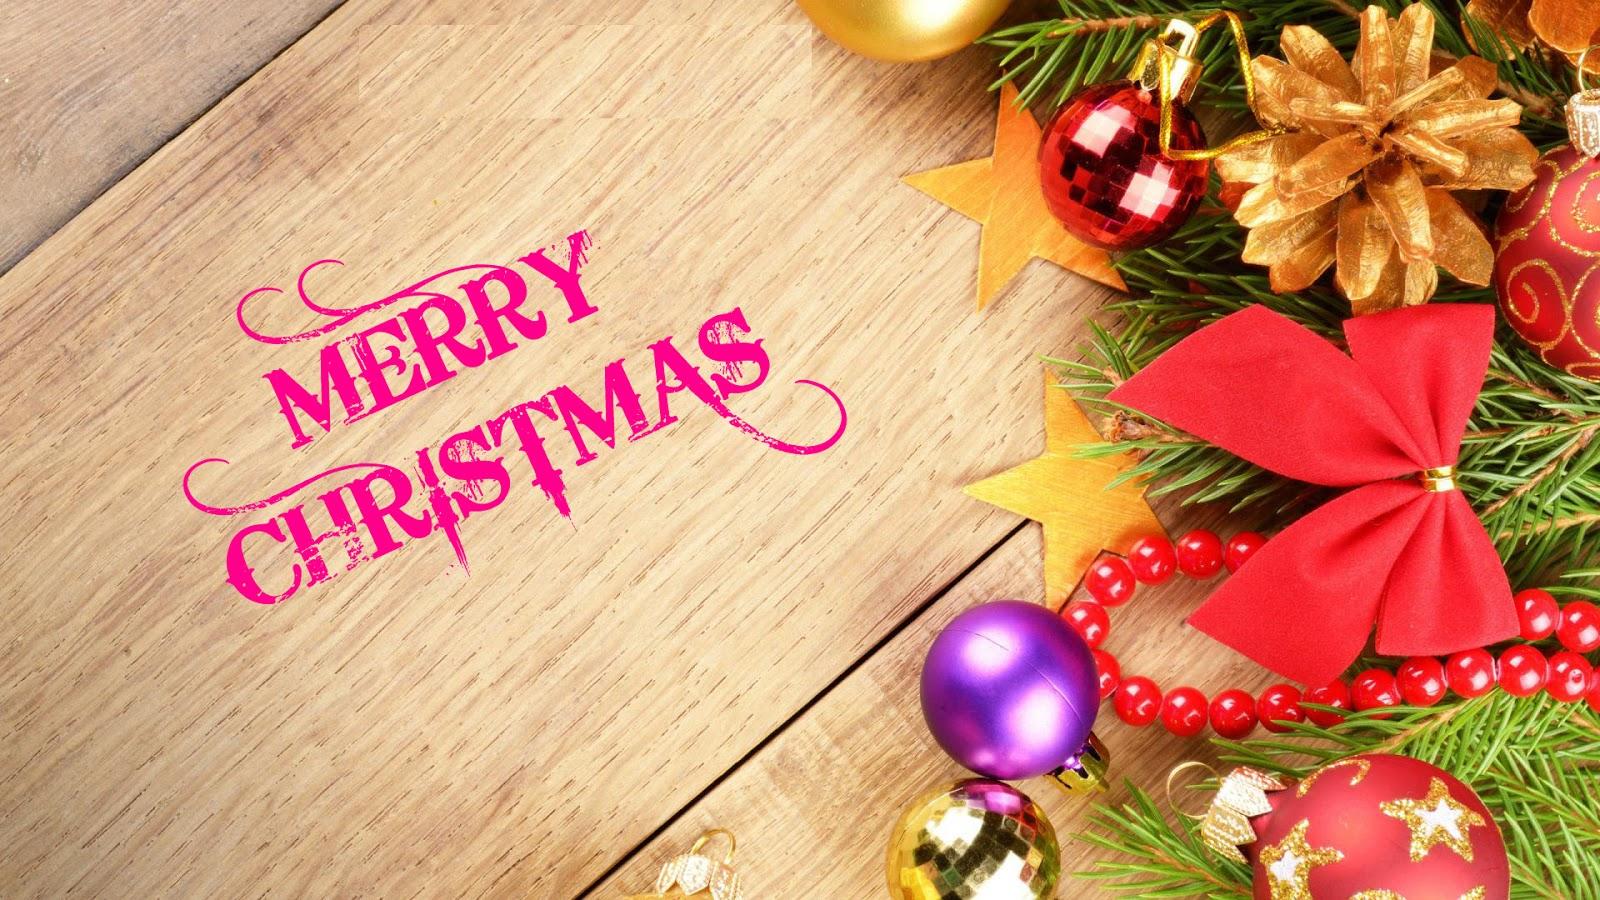 Awesome Christmas WallPapers 2016 HD Collections